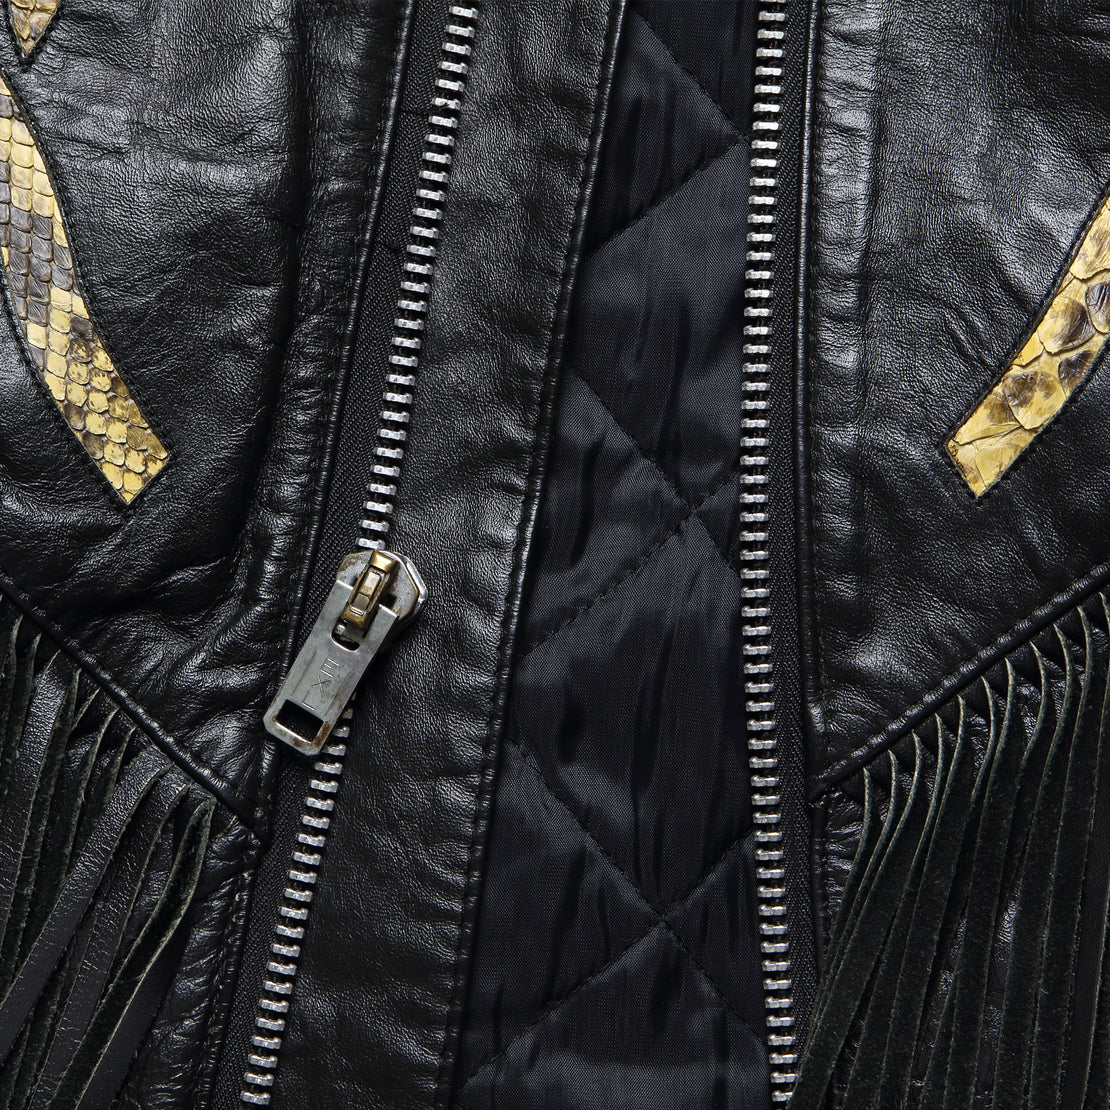 Leather Rider Concho & Tassle Biker Jacket - Black - Vintage - STAG Provisions - W - One & Done - Apparel